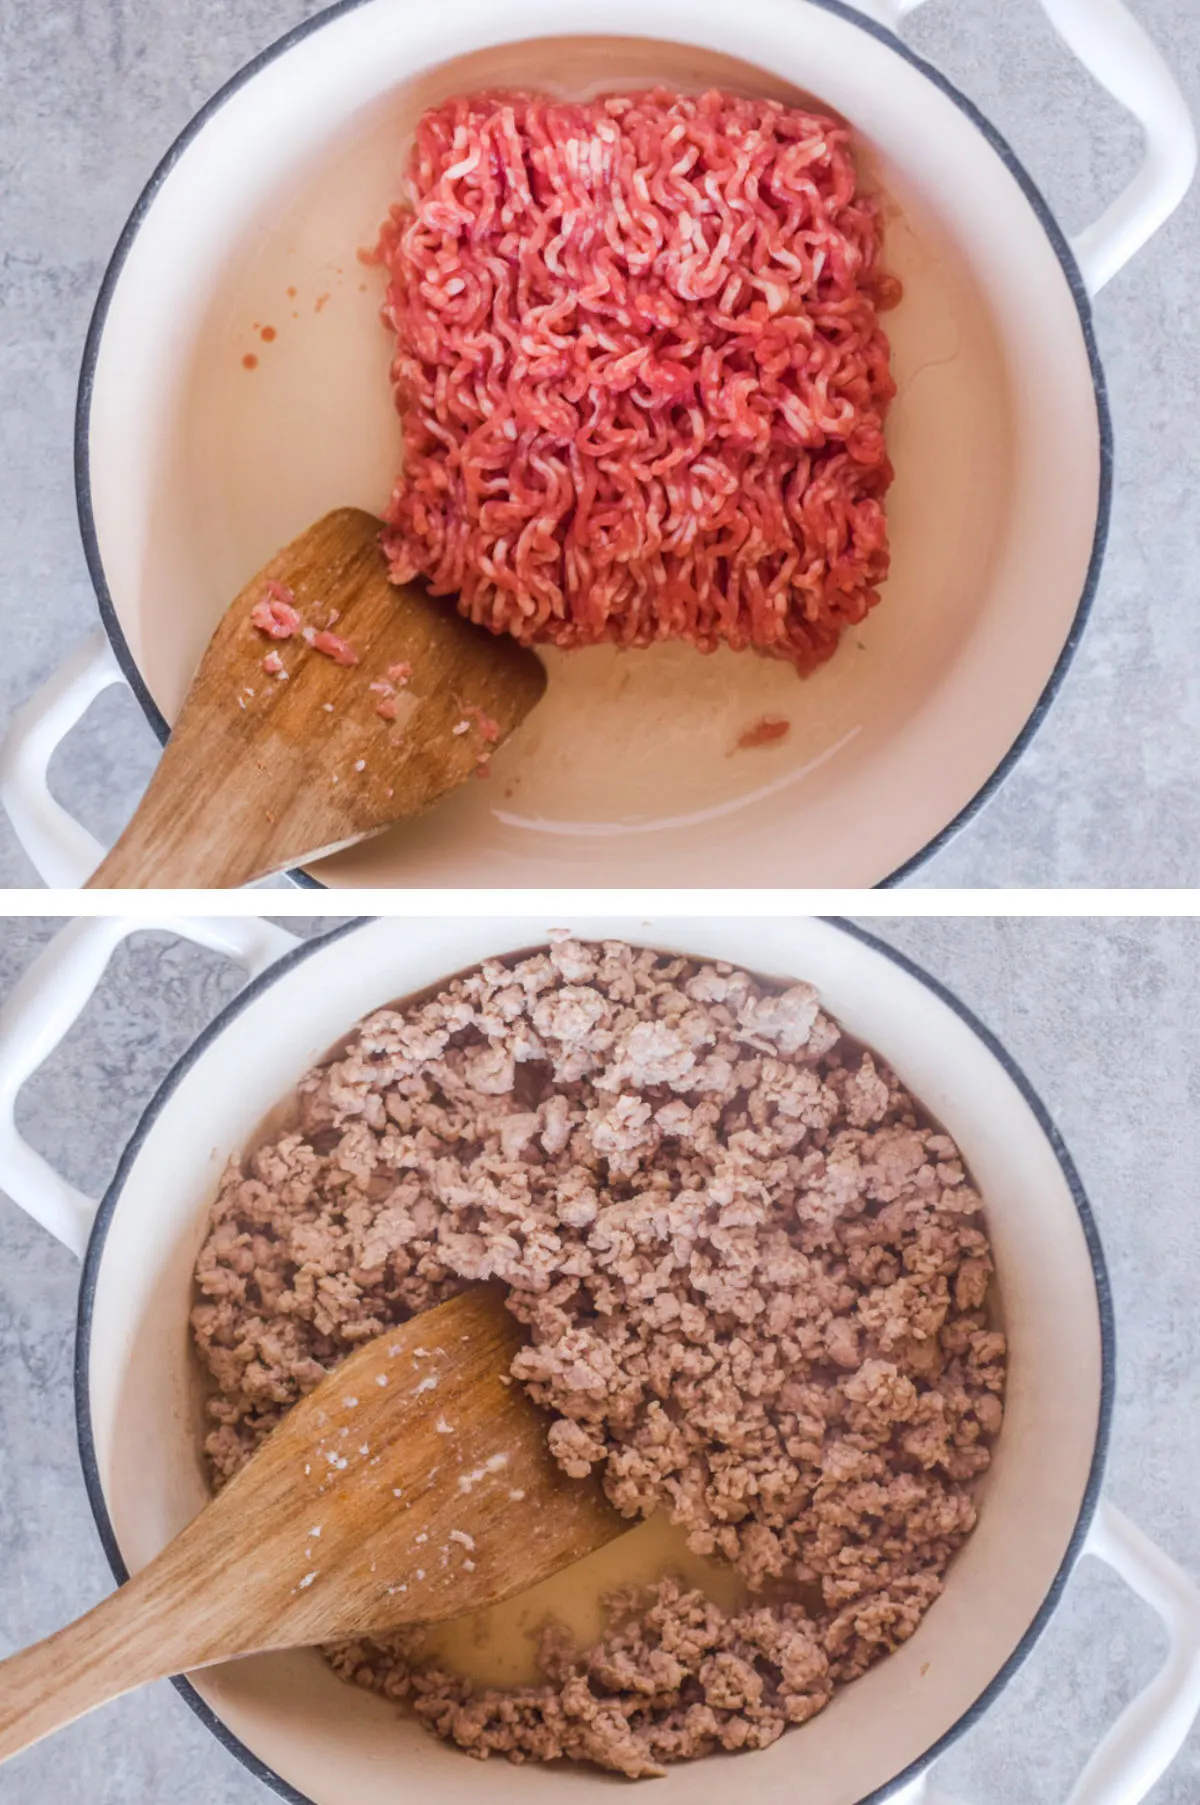 Two overhead images in one: 1. Raw ground pork in a large white pot. 2. Cooked ground pork in a large white pot. 